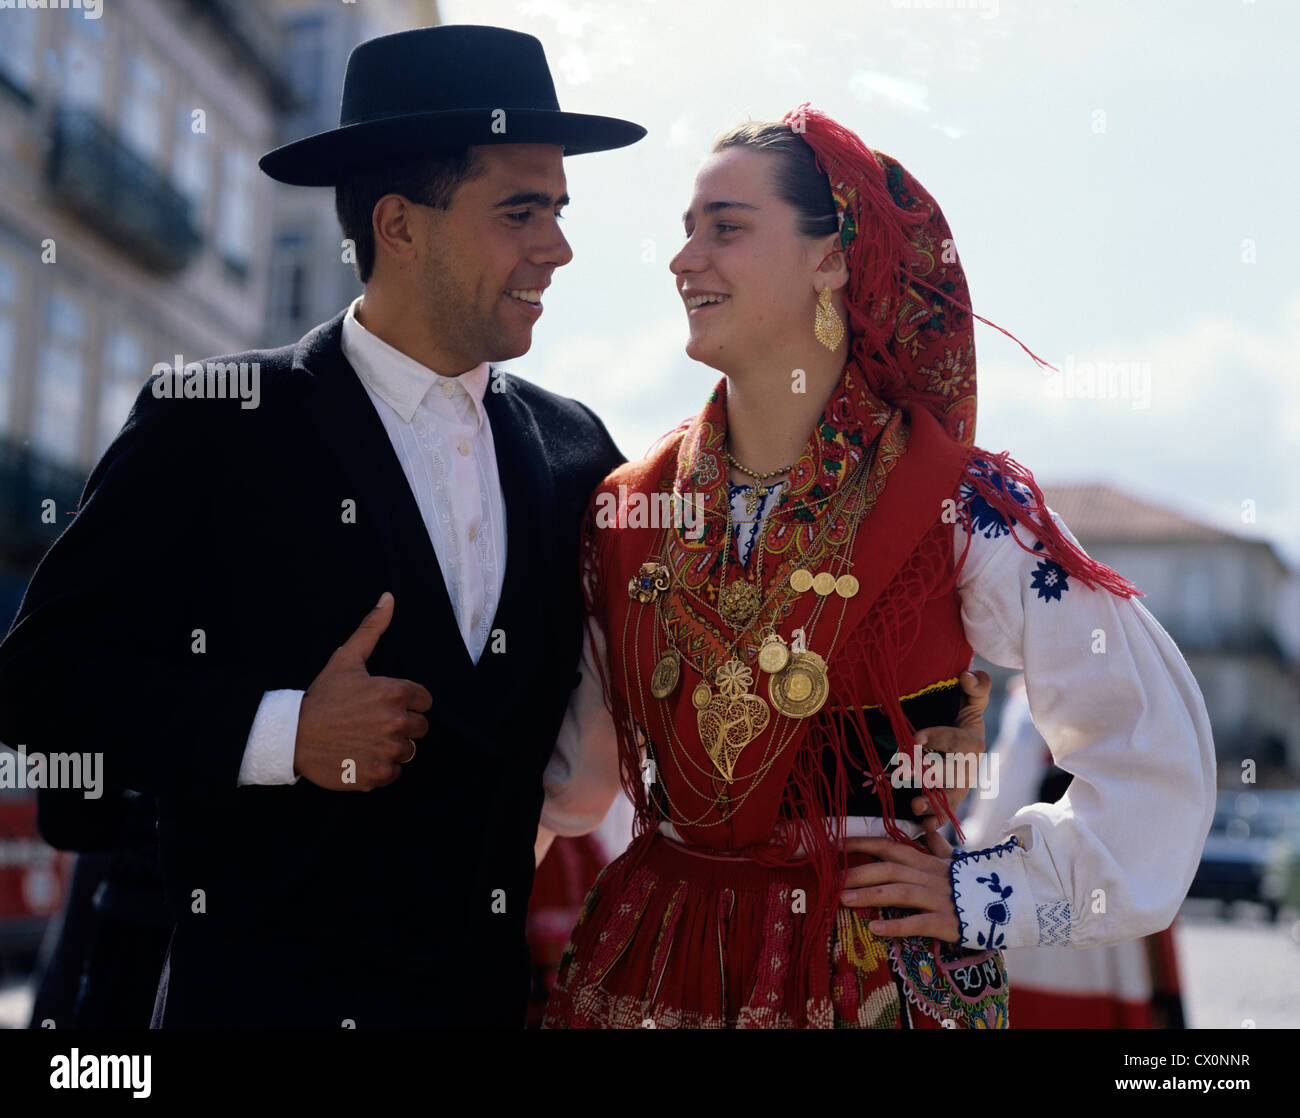 What is traditional Portuguese clothing?